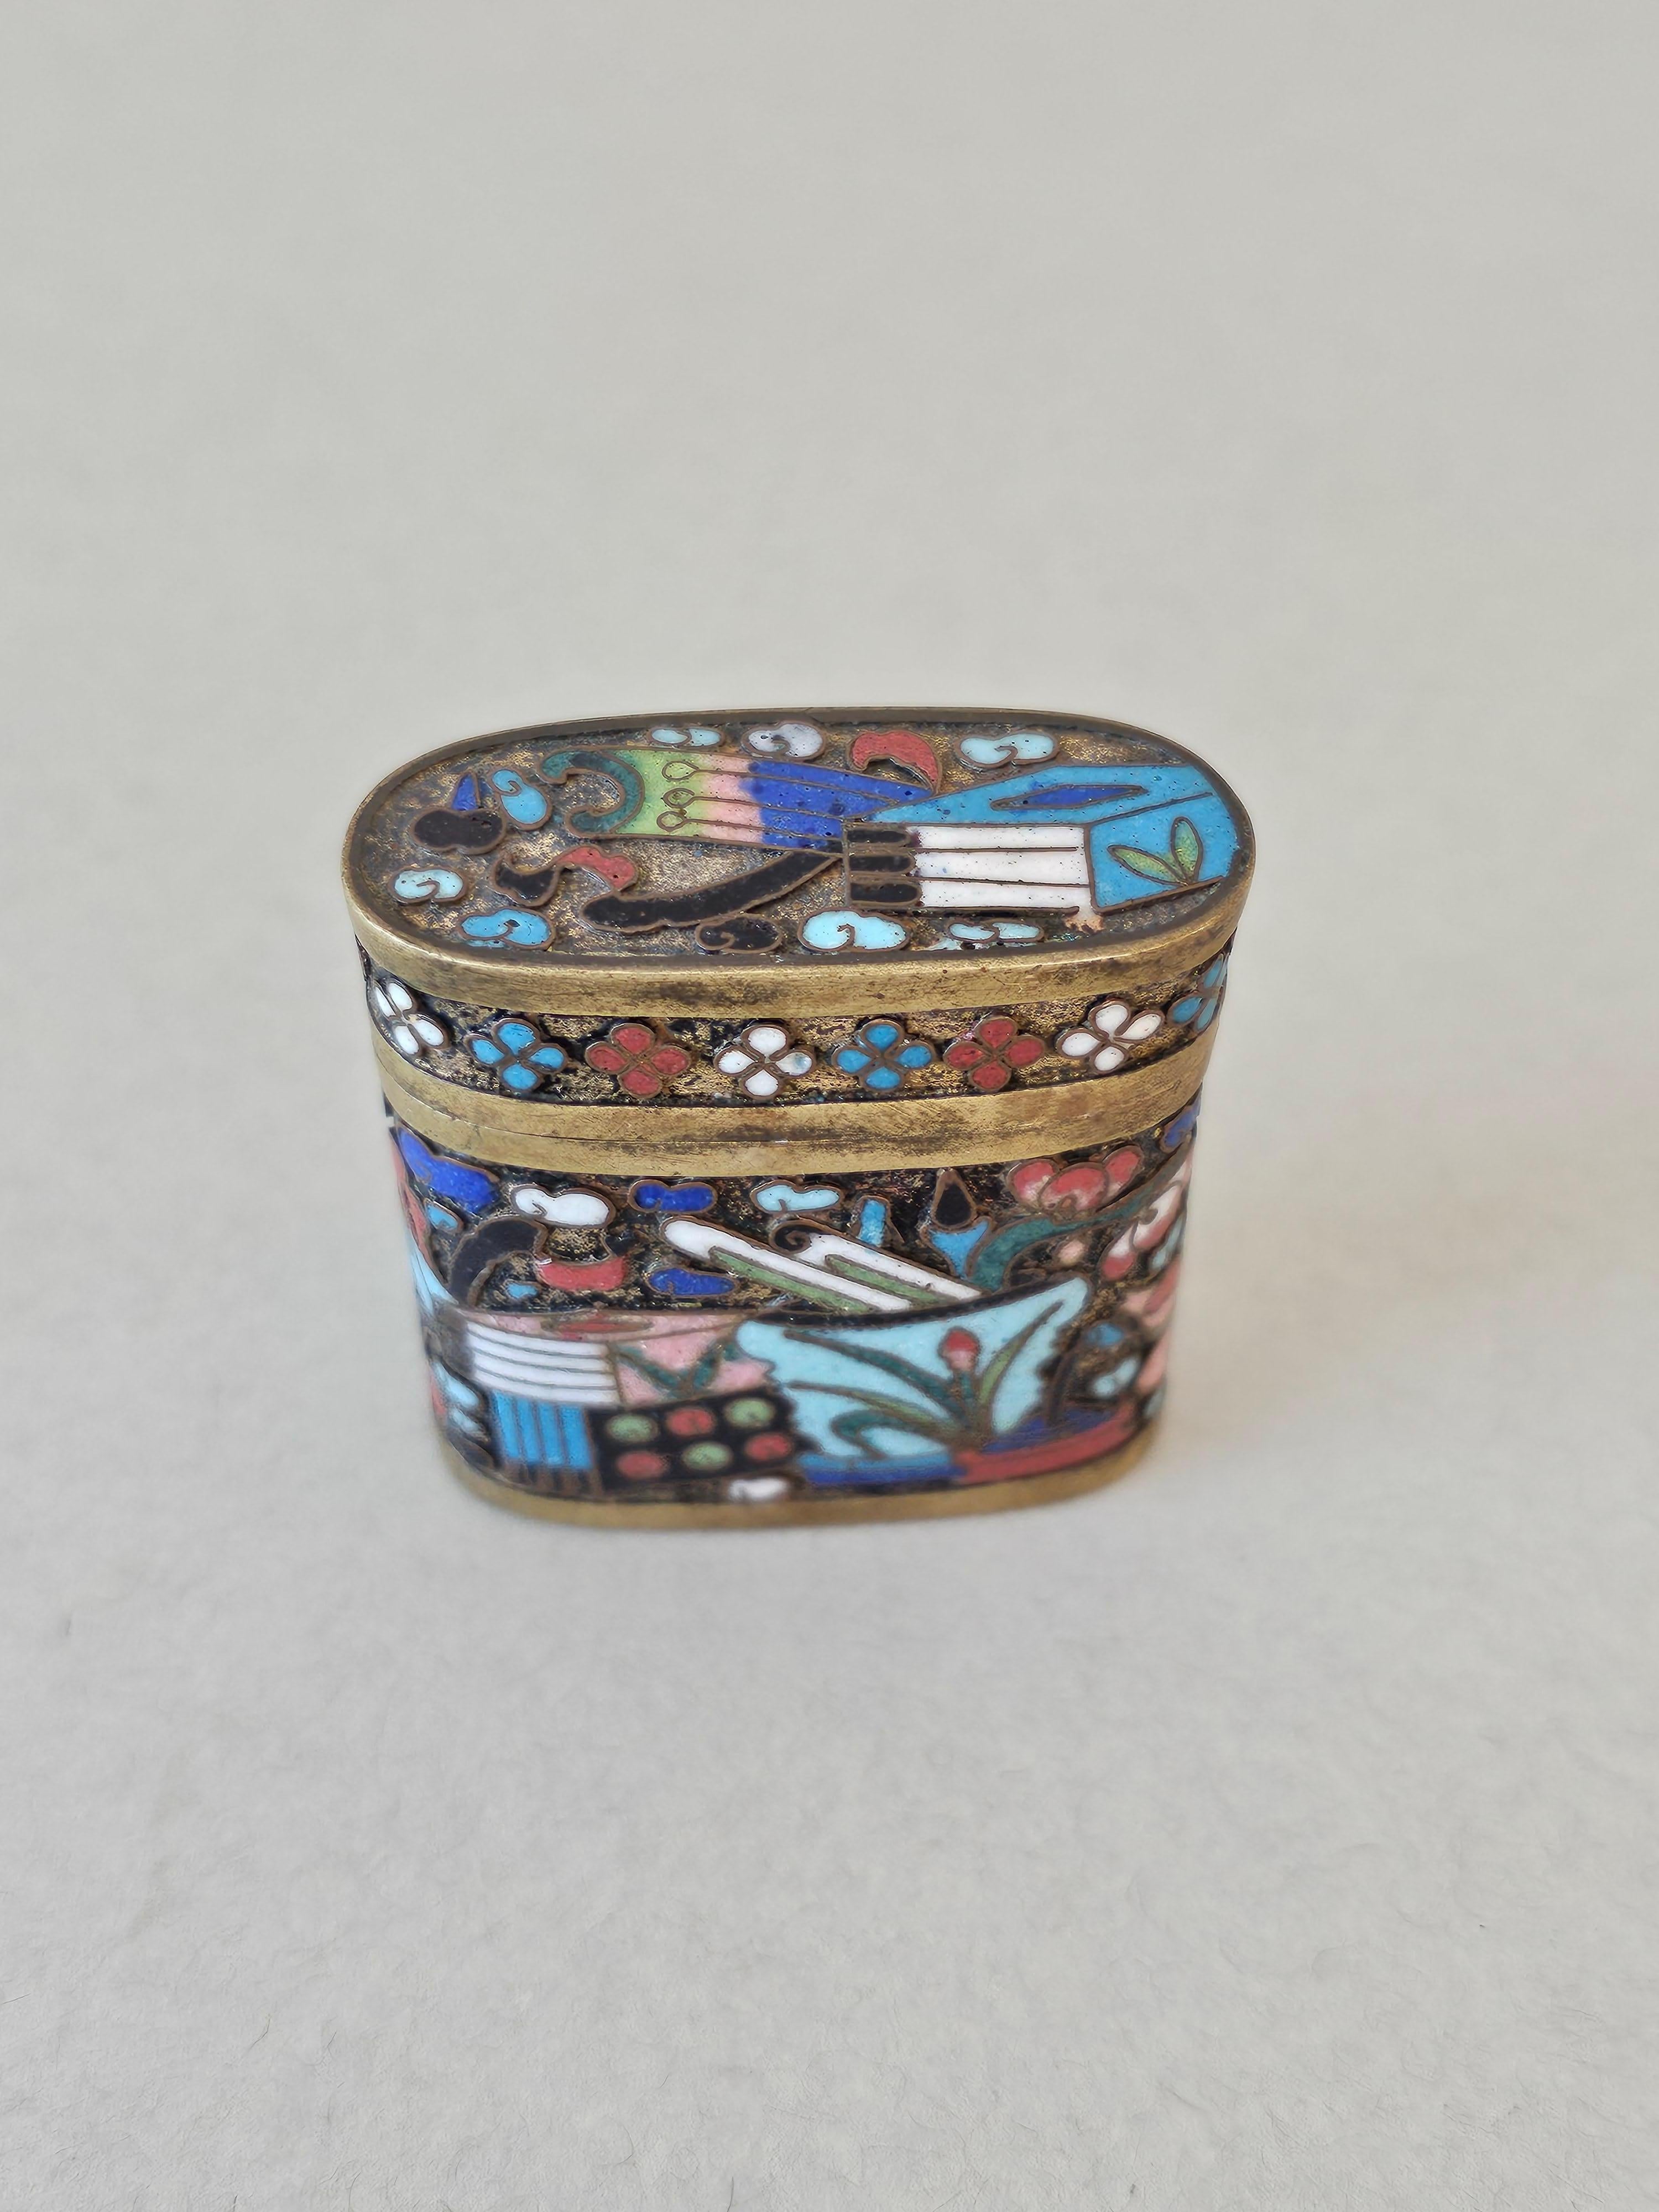 A rare, interesting, and a bit unusual Qing Dynasty (1636-1912) Cloisonné enamel opium box. 

Originating in China in the 19th century, small lidded oval shaped polychrome enameled bronze opium case with blue interior and bottom. Decorative and